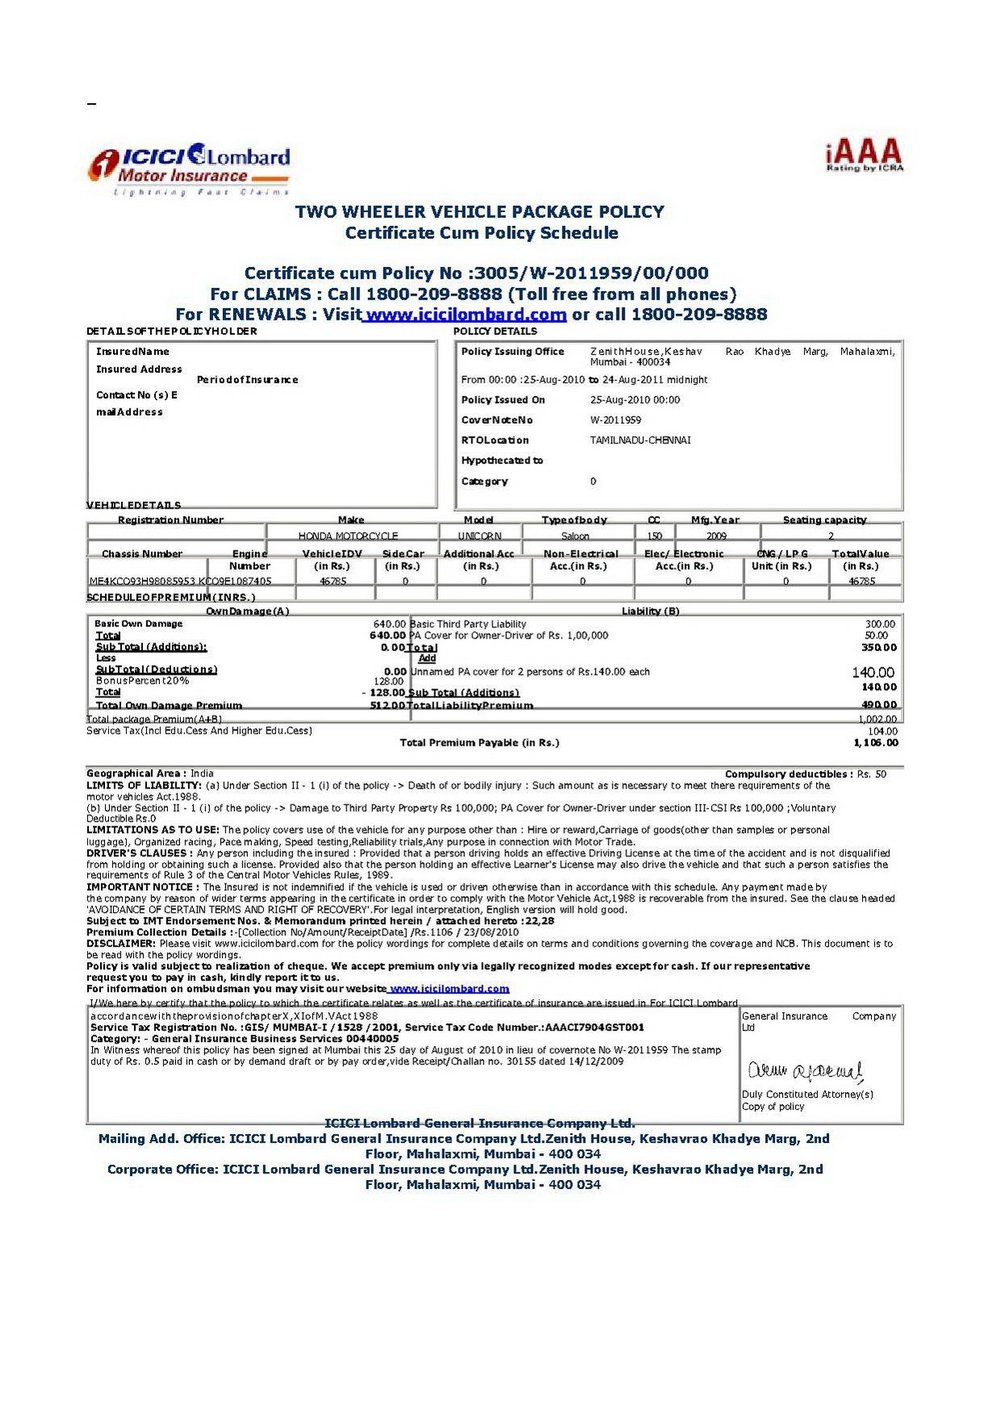 Db450 form Part C Nys Disability form Db120 1 forms 4451